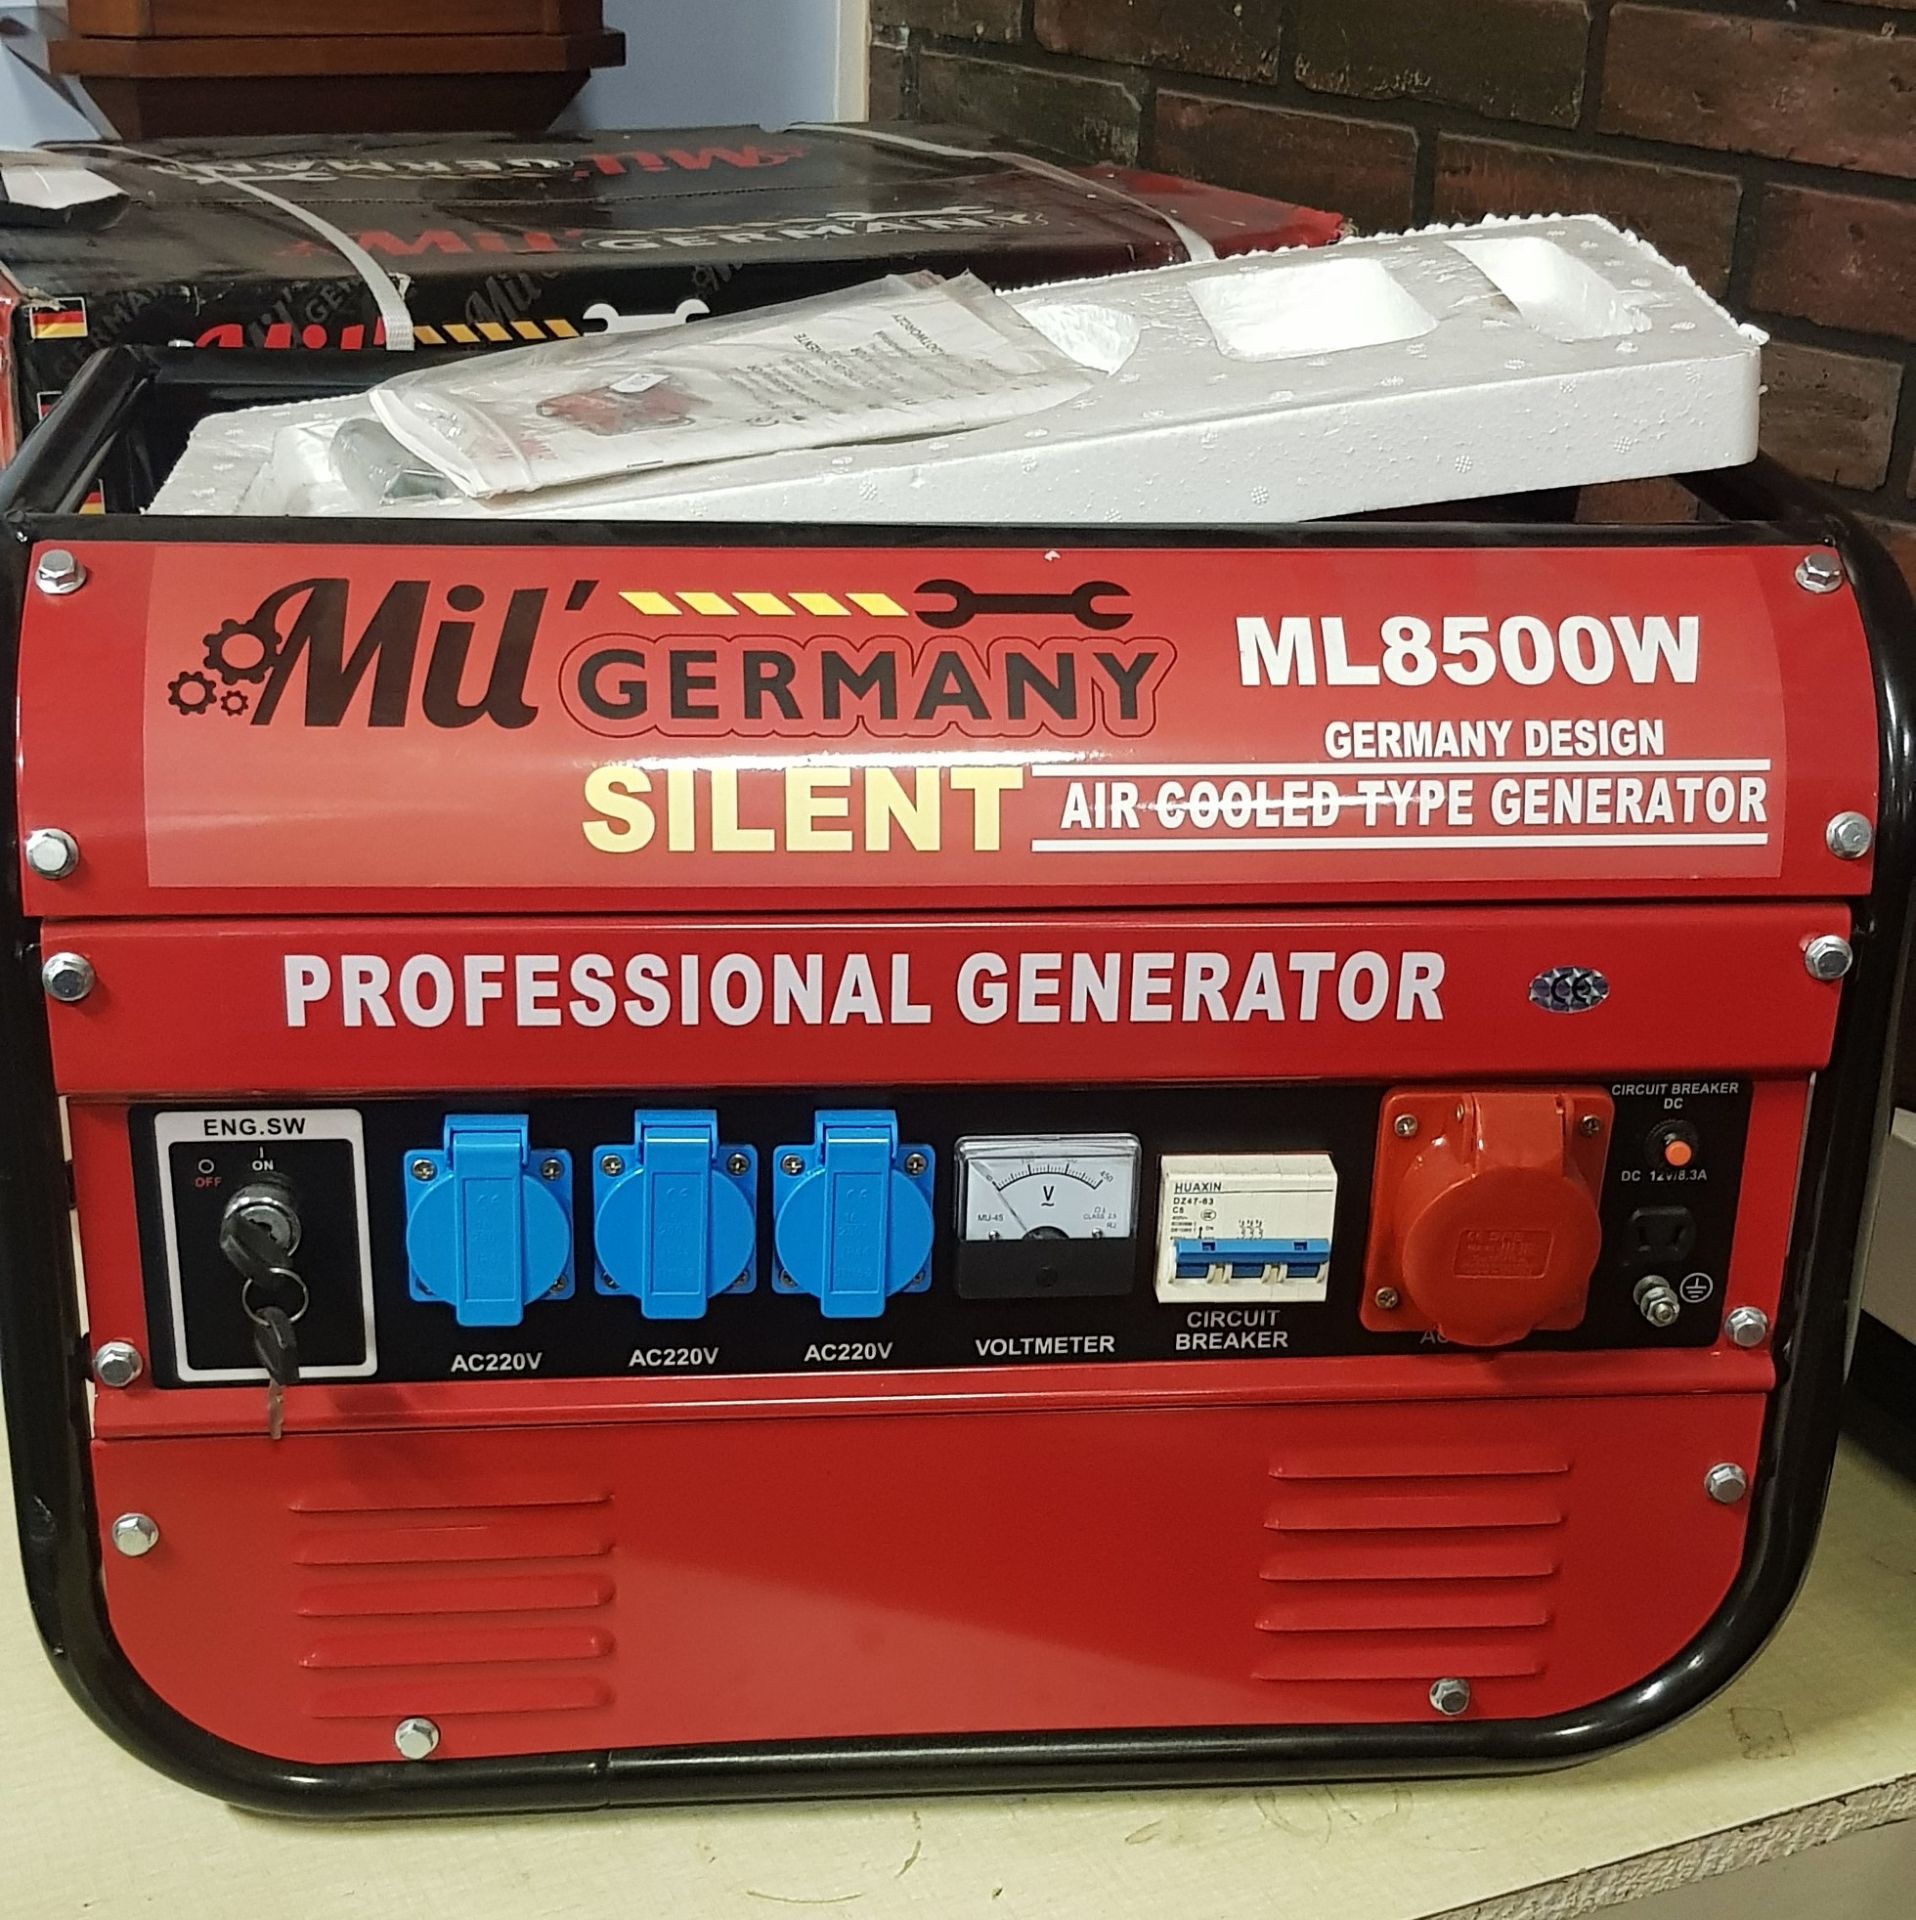 A Mil Germany ML8500W petrol generator, unused, with manual, boxed - Image 2 of 3